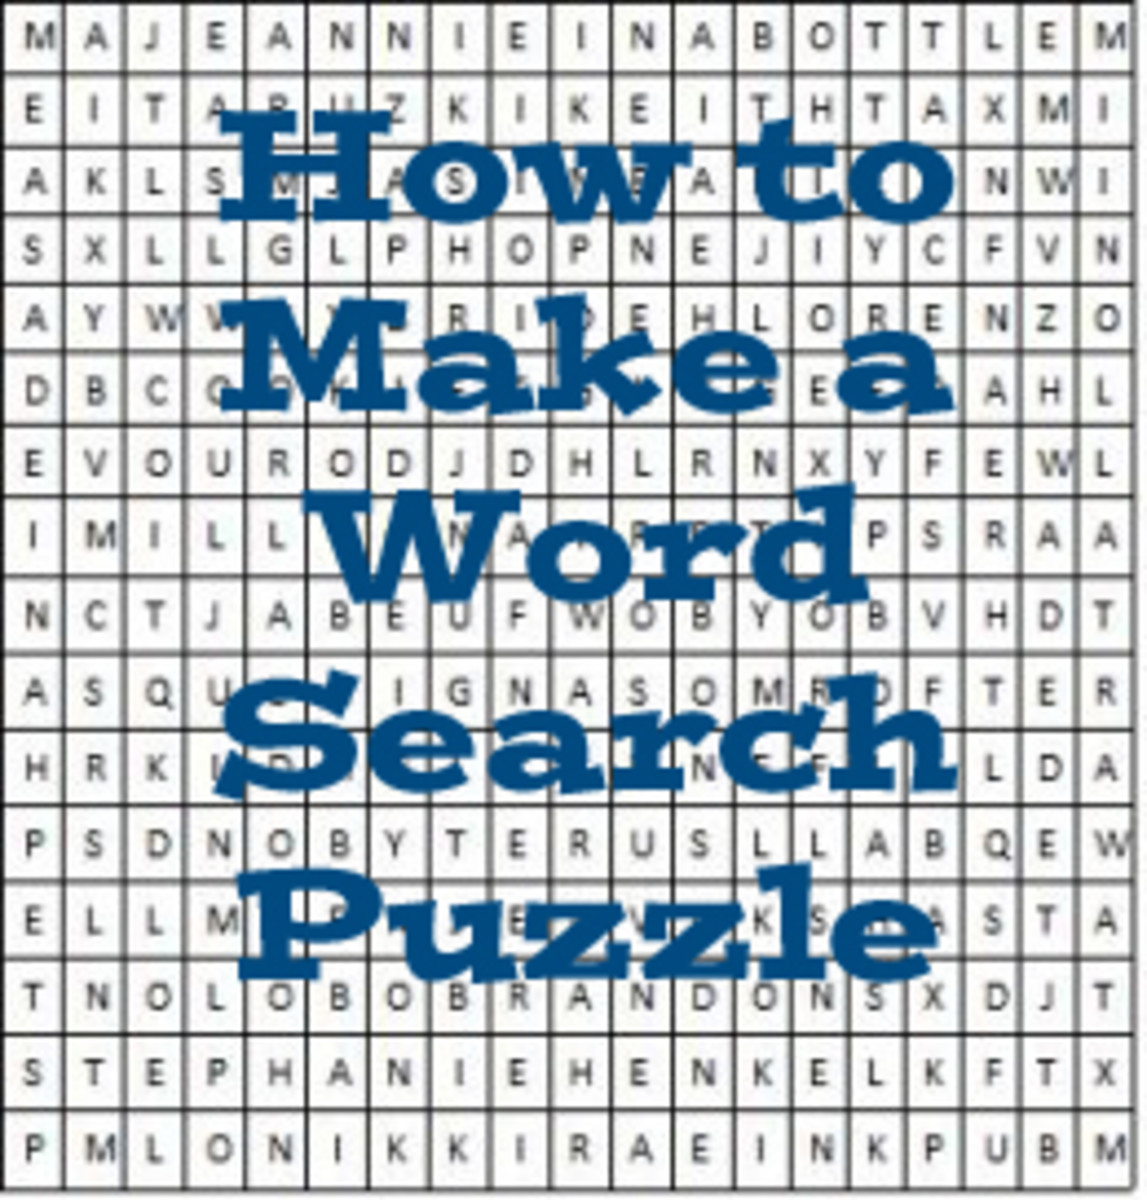 Easy Steps to Create Your Own Word Search Puzzle | hubpages